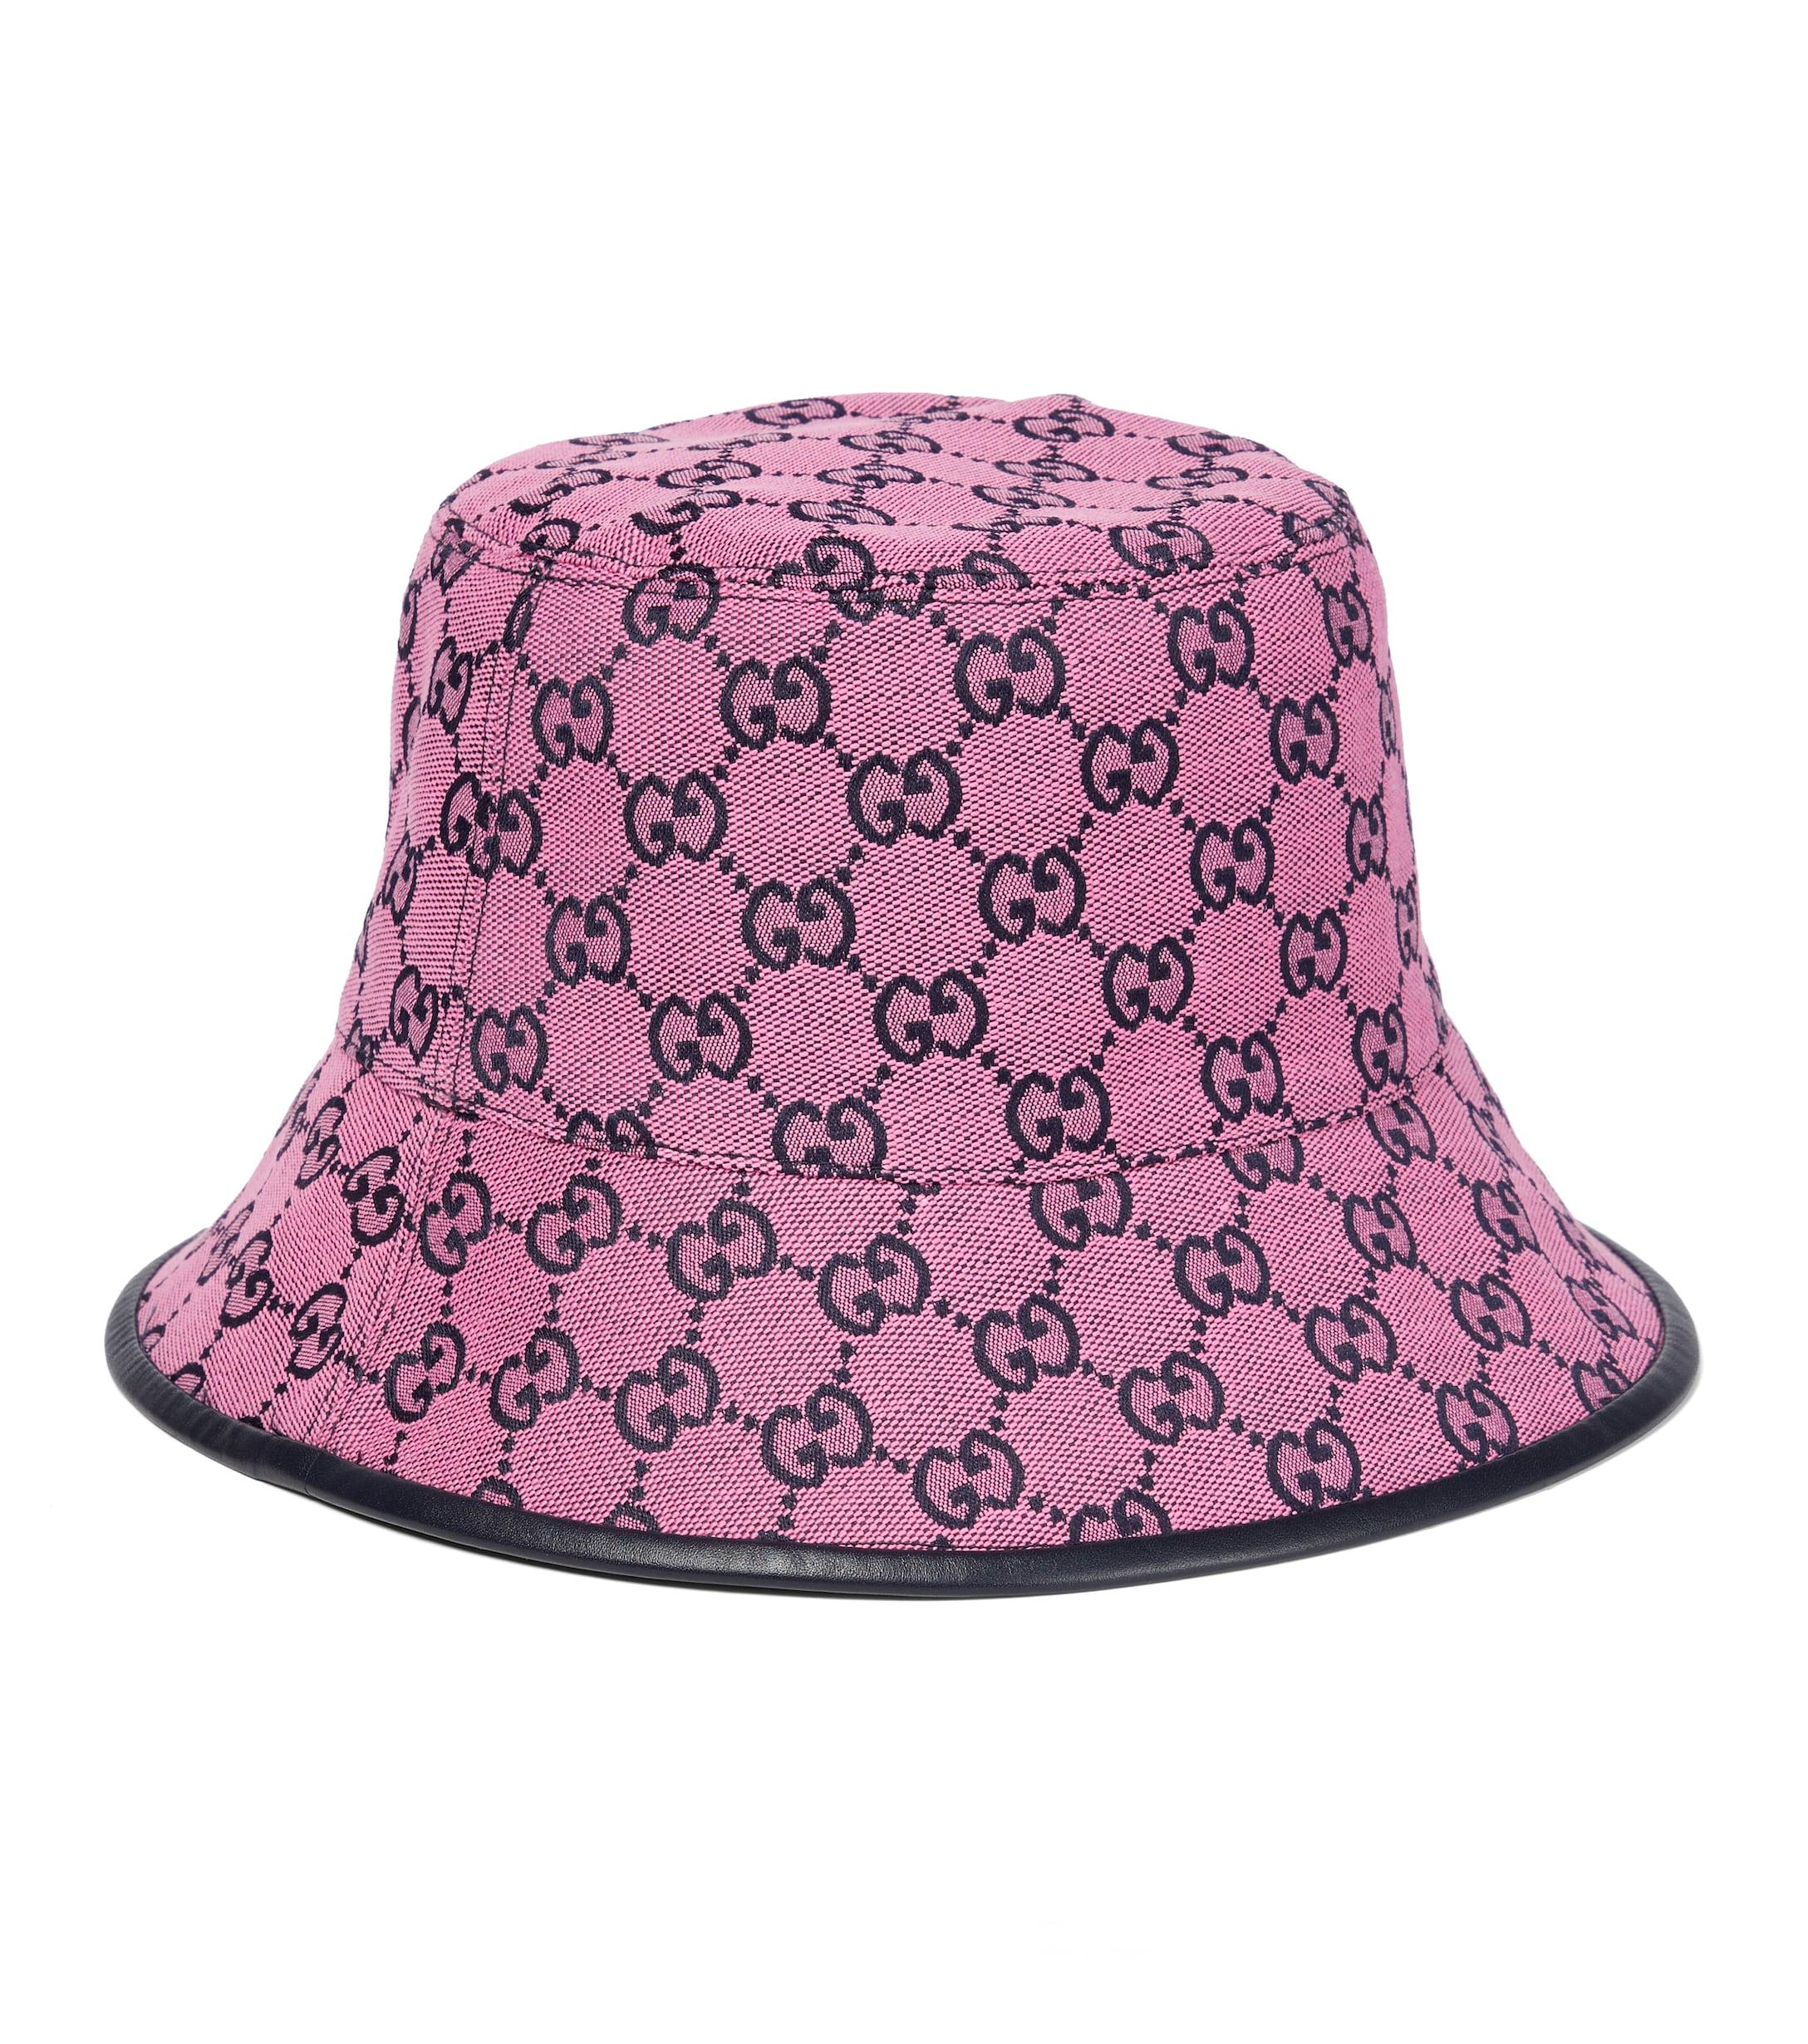 Gucci Leather GG Canvas Bucket Hat in Pink - Lyst